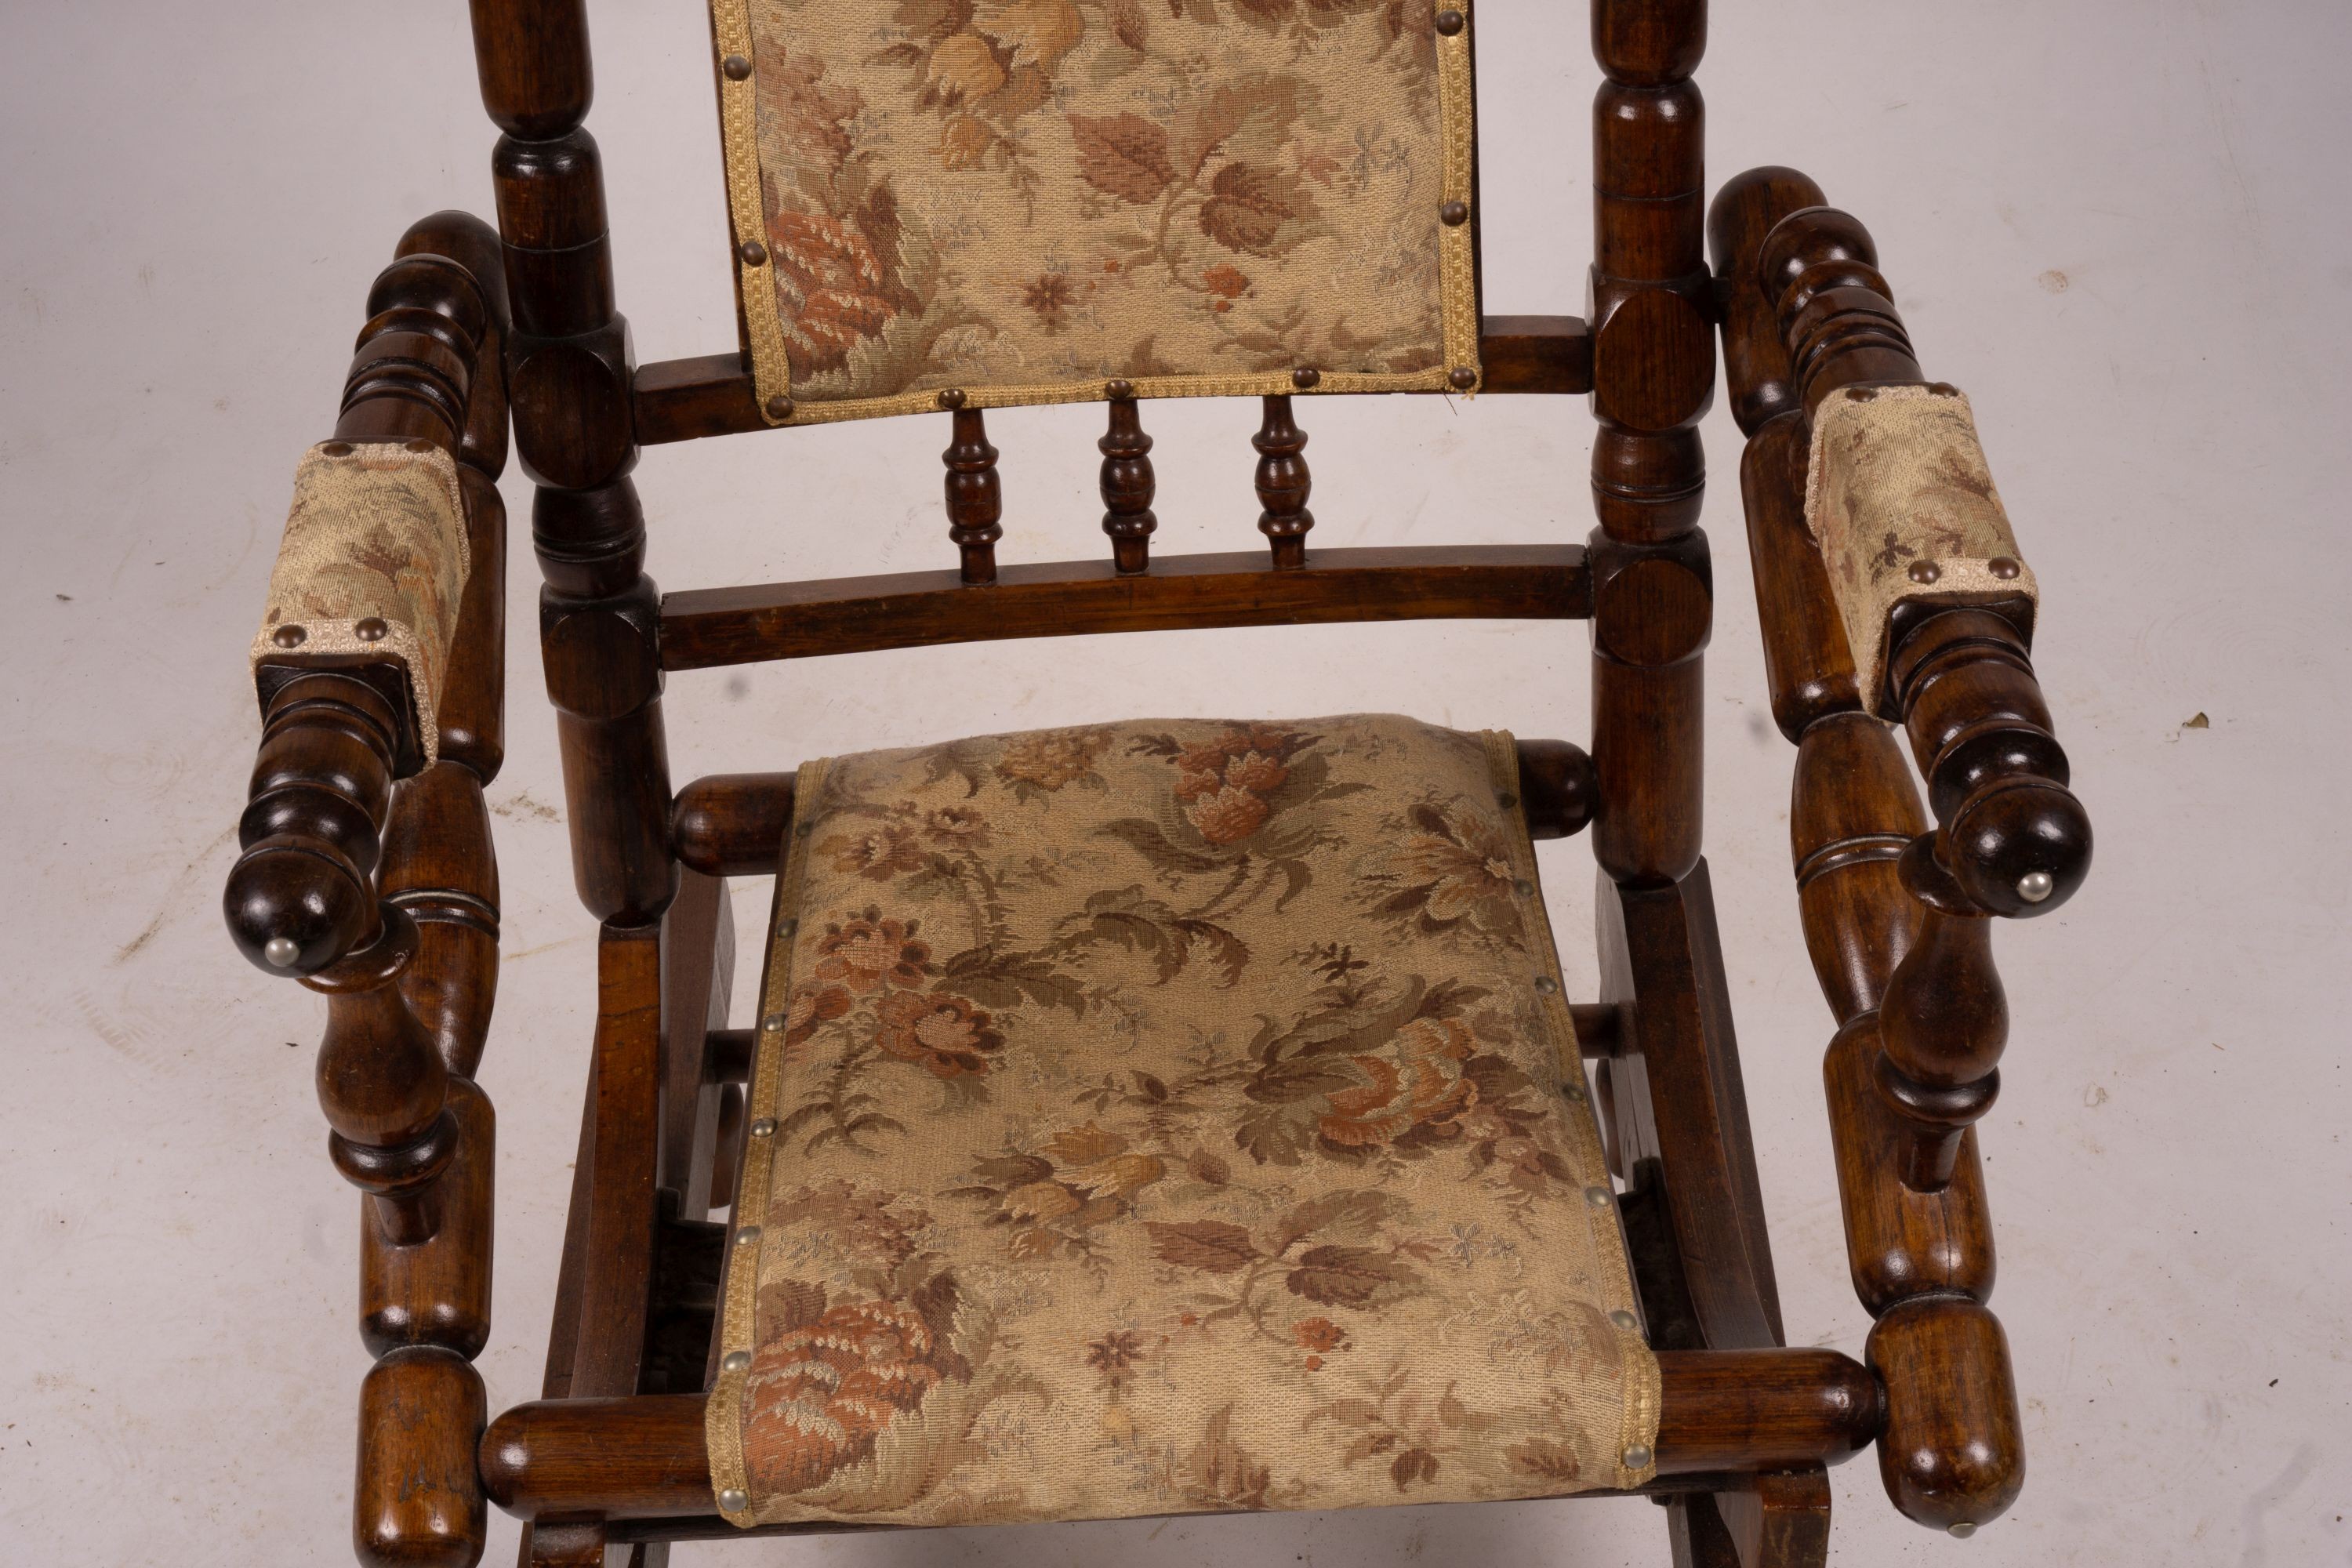 An early 20th century American turned mahogany rocking chair